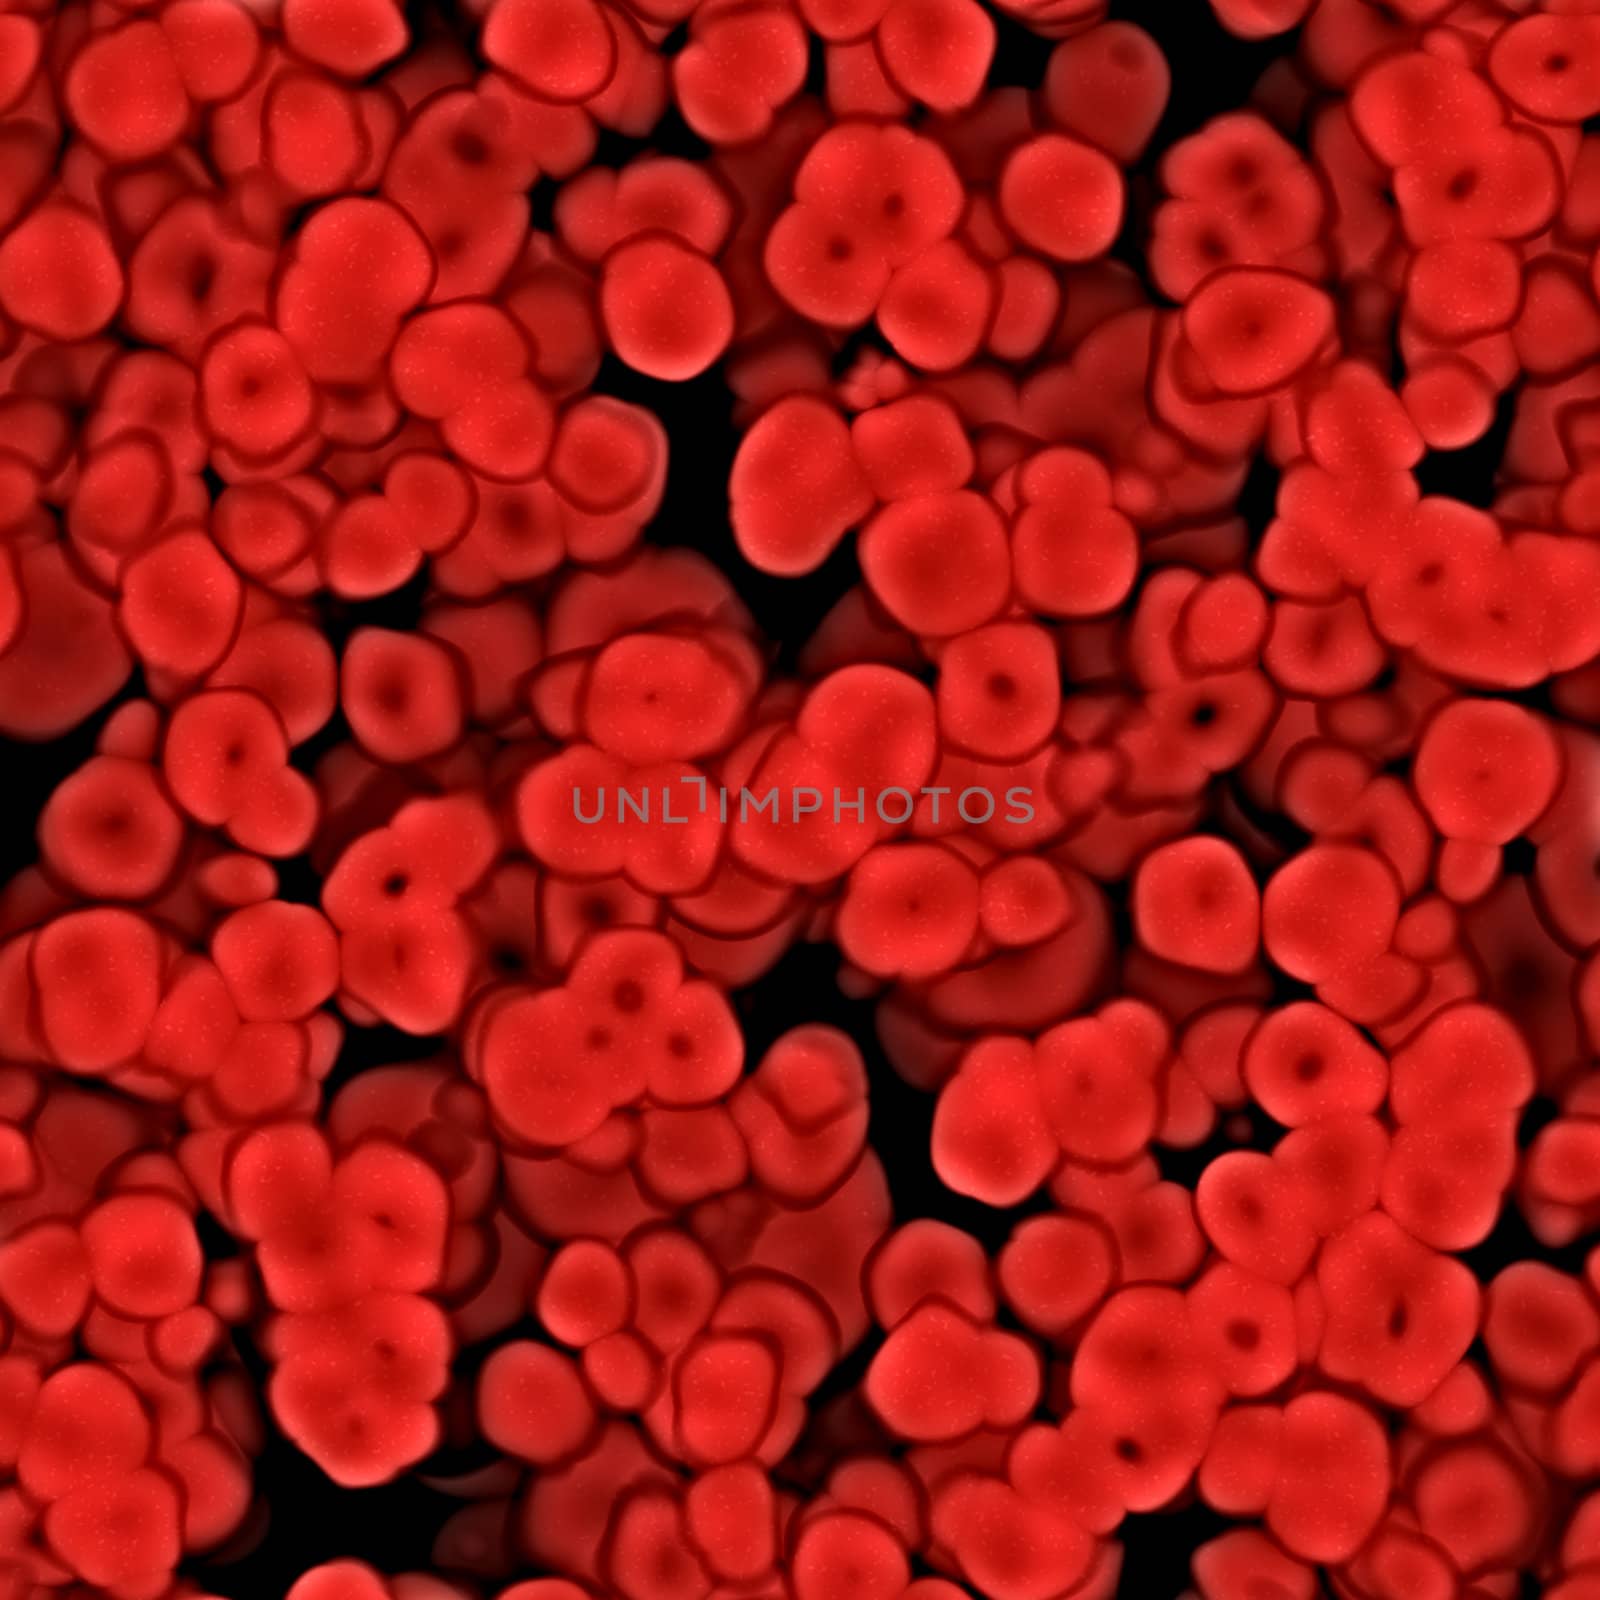 Red microorganisms or blood cells illustration that tiles seamlessly as a pattern in any direction.